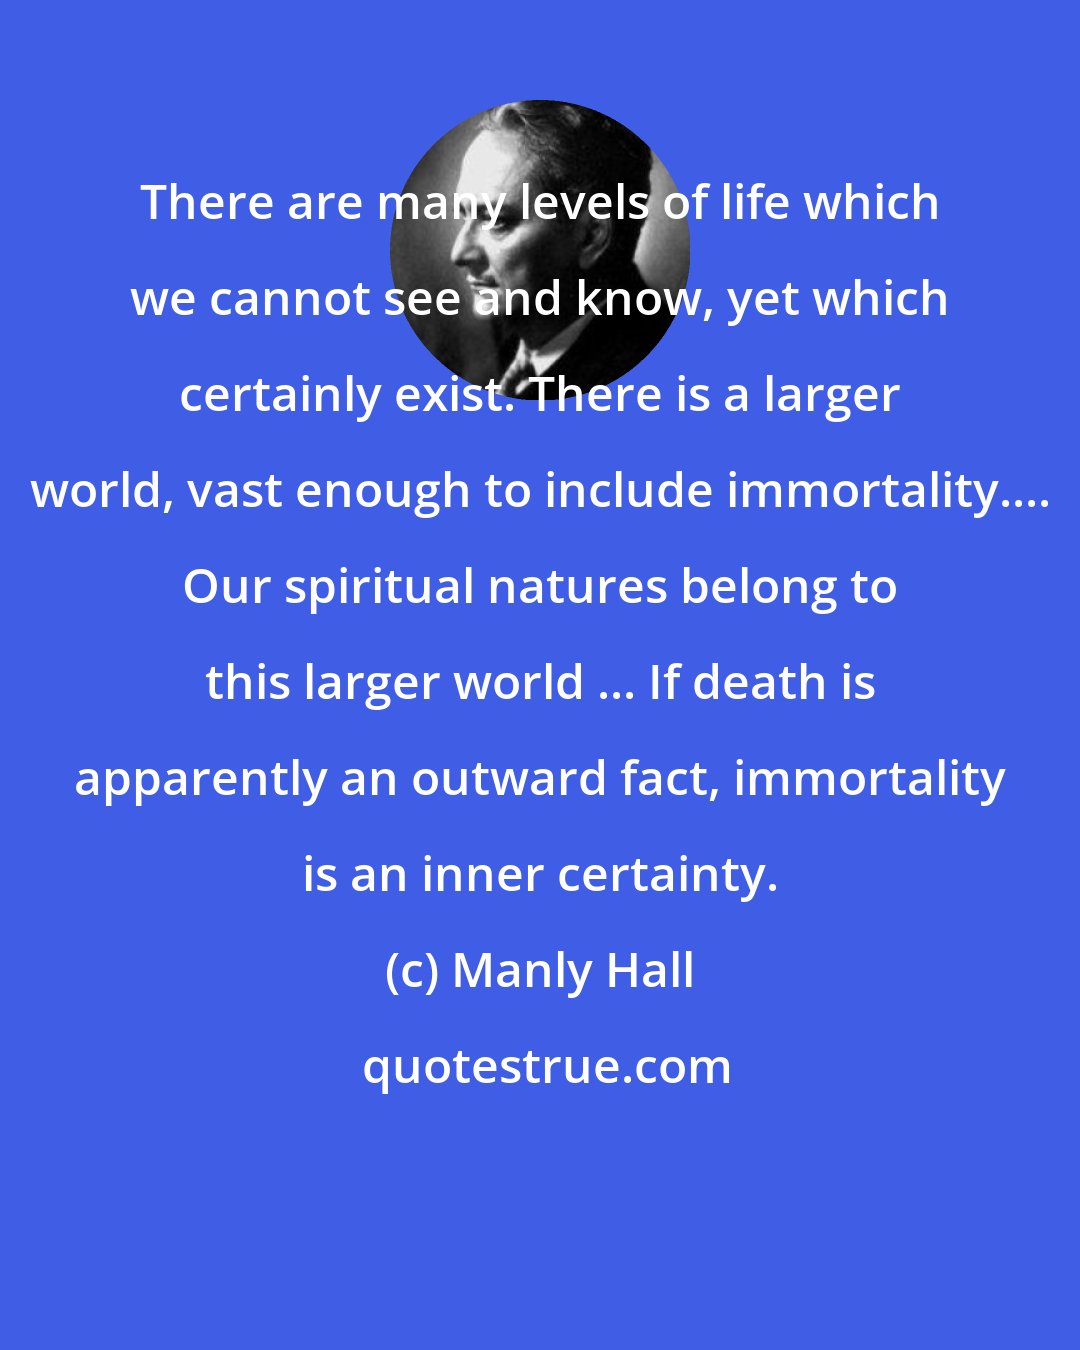 Manly Hall: There are many levels of life which we cannot see and know, yet which certainly exist. There is a larger world, vast enough to include immortality.... Our spiritual natures belong to this larger world ... If death is apparently an outward fact, immortality is an inner certainty.